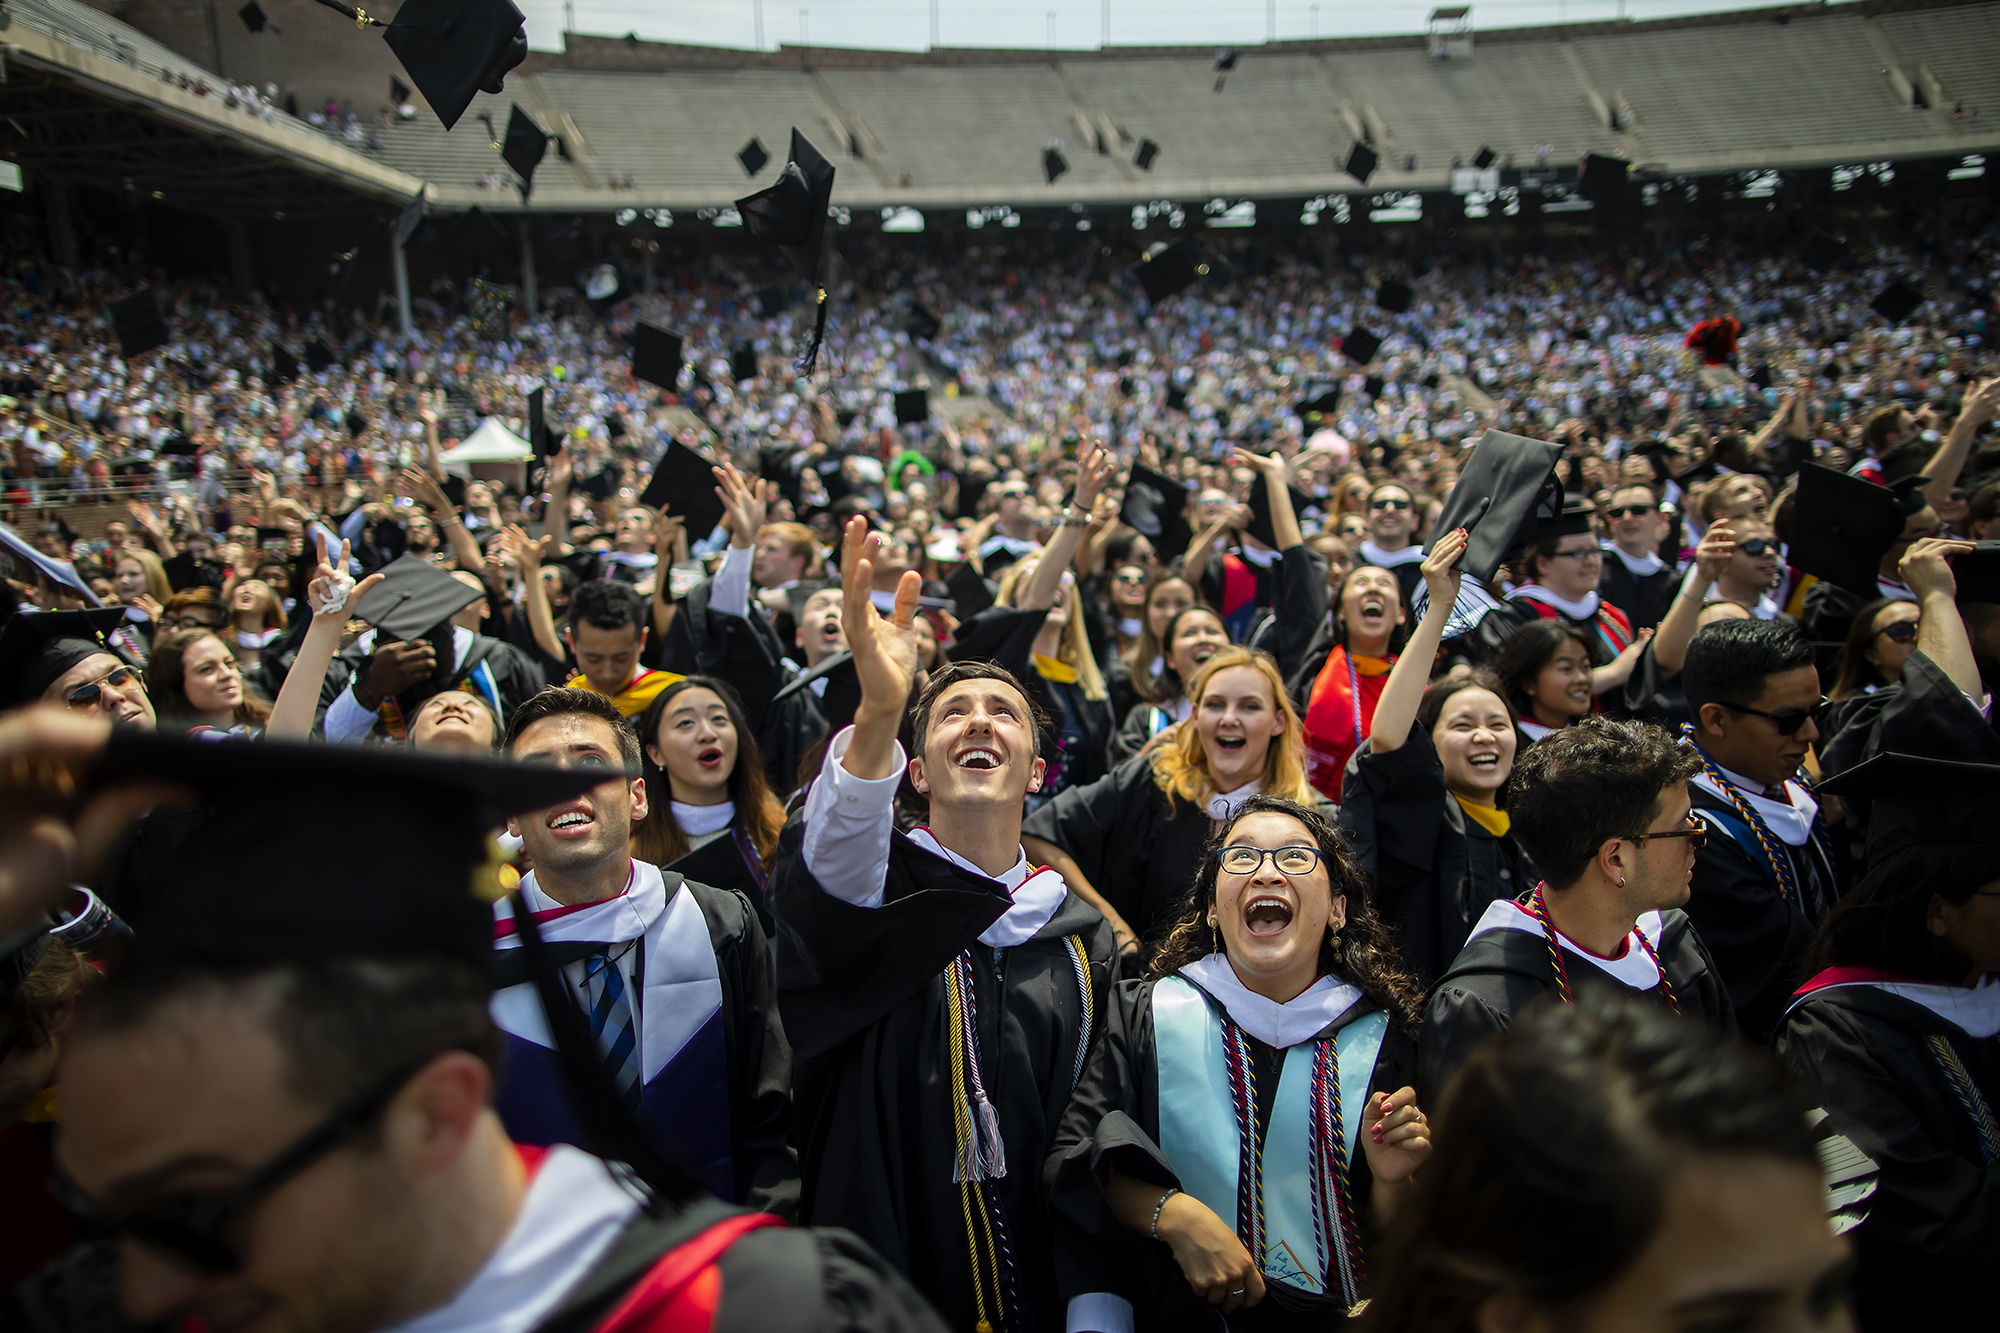 Graduating students toss their caps in the air.